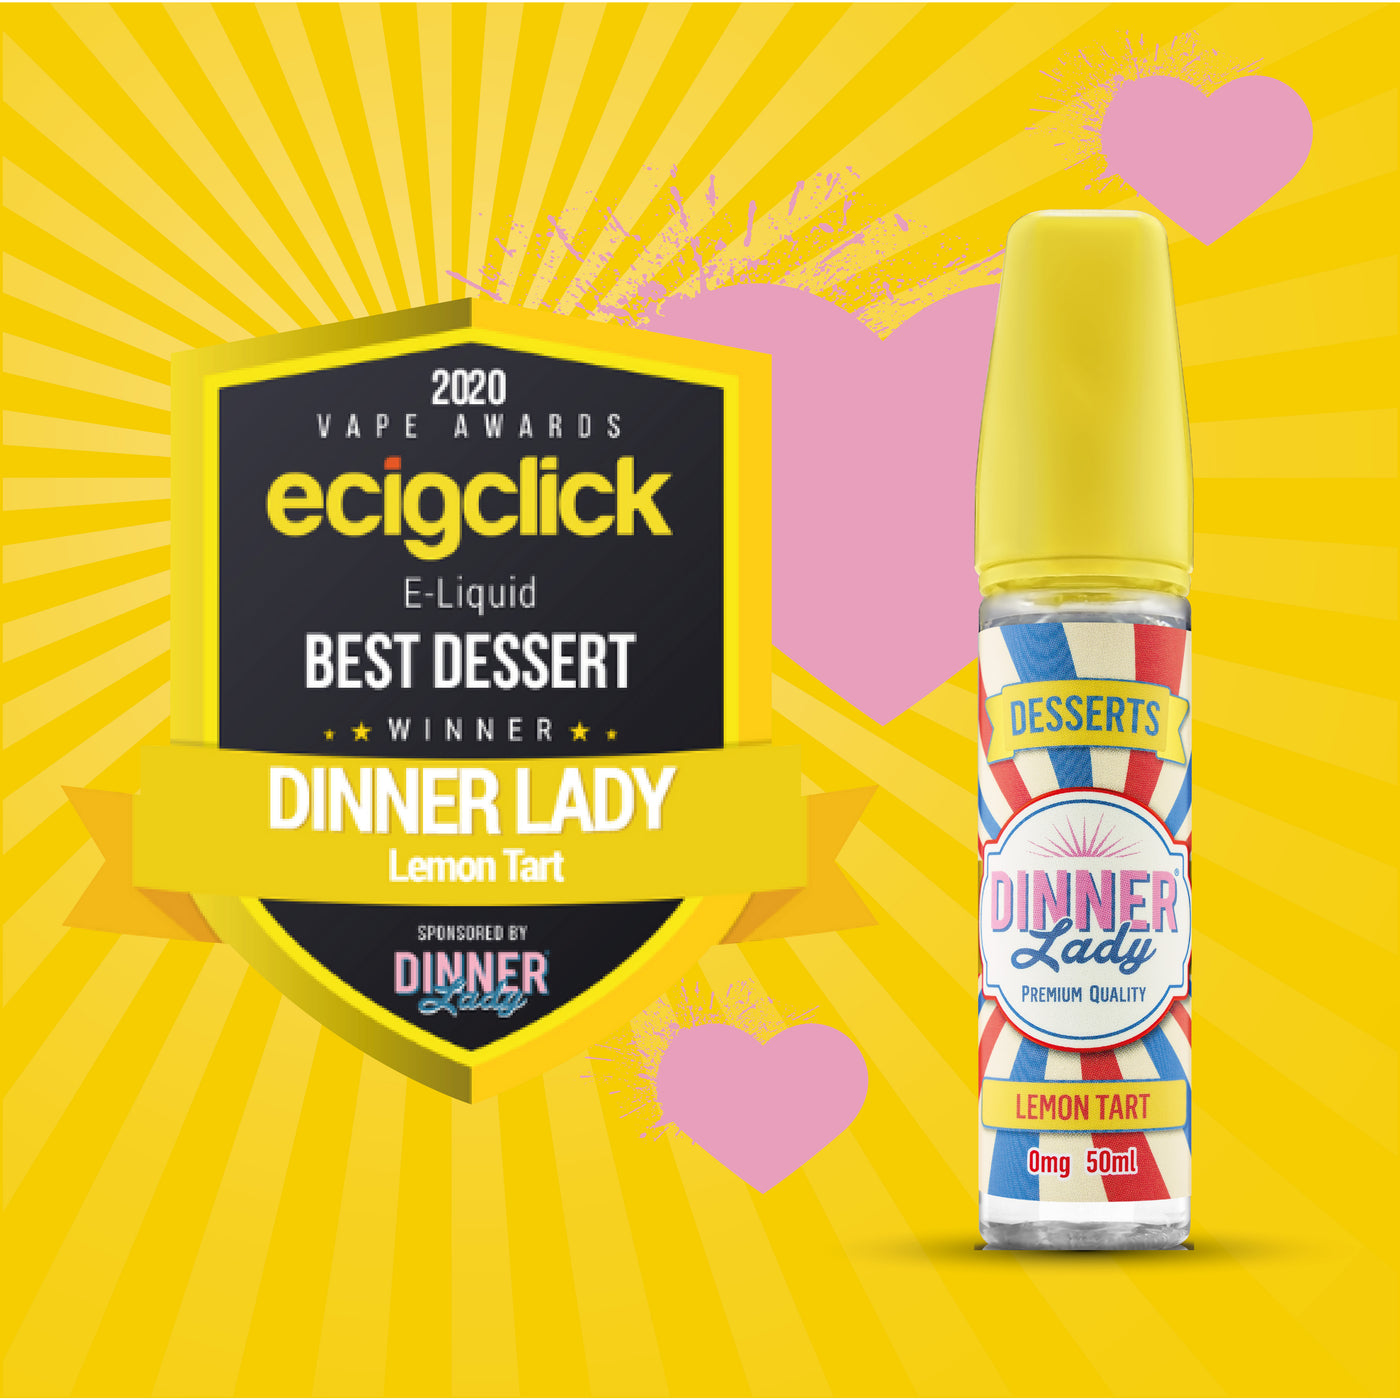 LEMON TART: THE ORIGINAL AND THE BEST, AS VOTED FOR BY ECIGCLICK AWARDS 2020